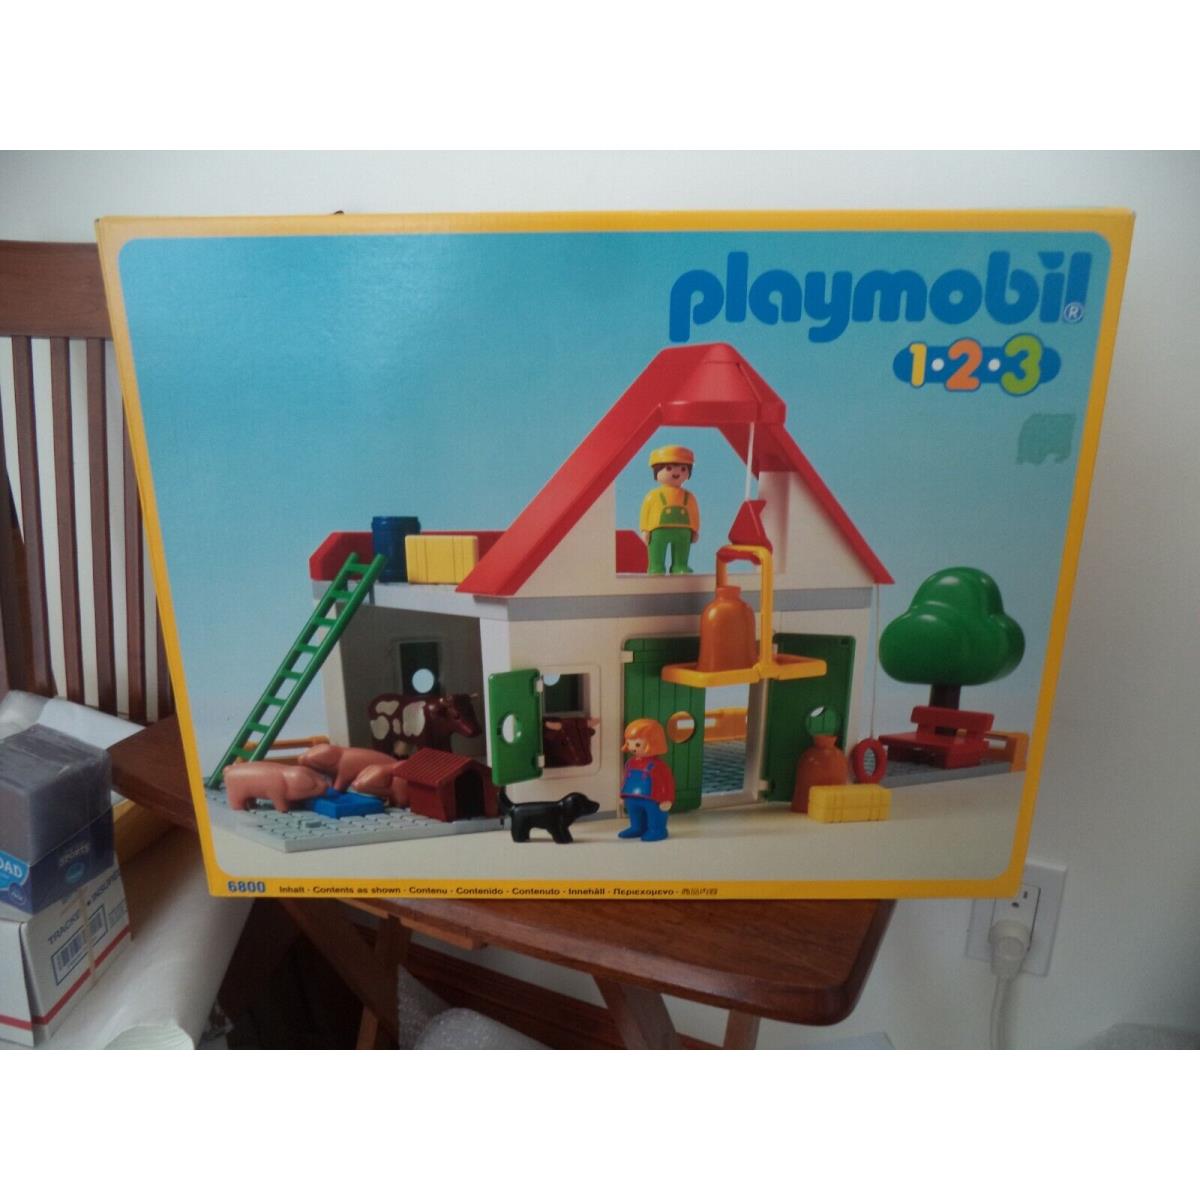 Vintage 1990 Playmobil 123 6800 Made in West Germany